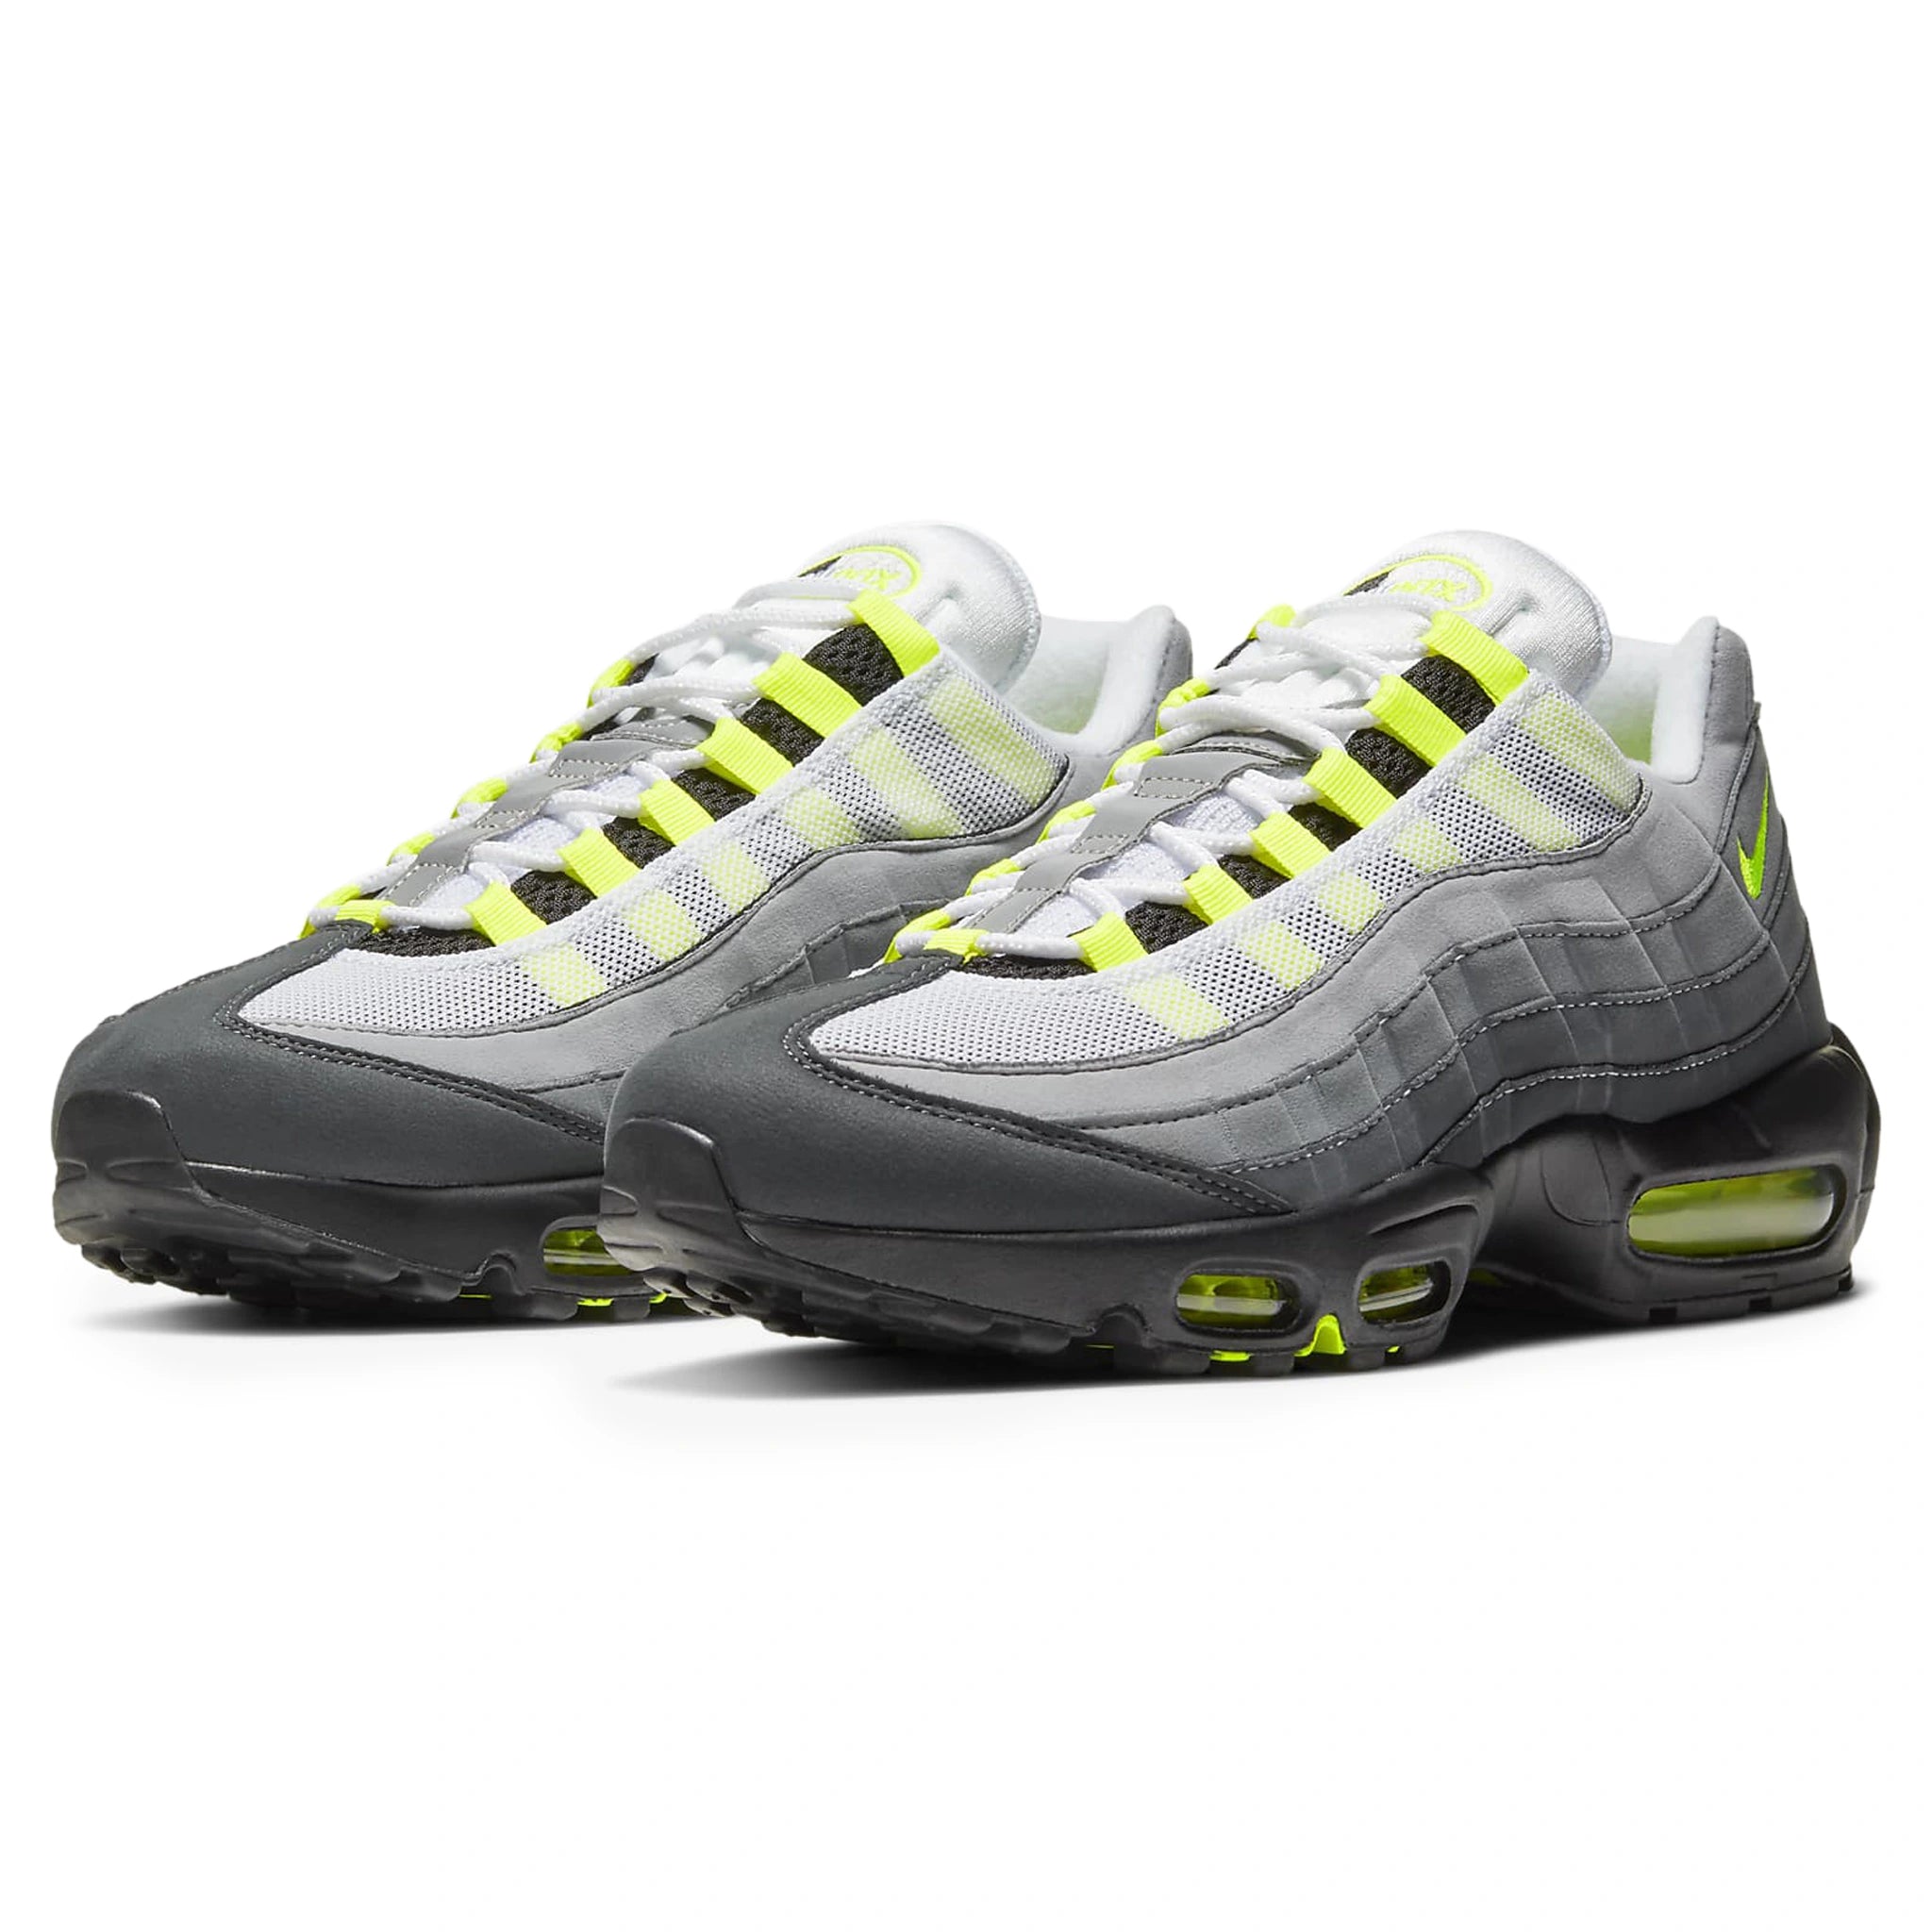 Front side view of Nike Air Max 95 OG Neon CT1689-001